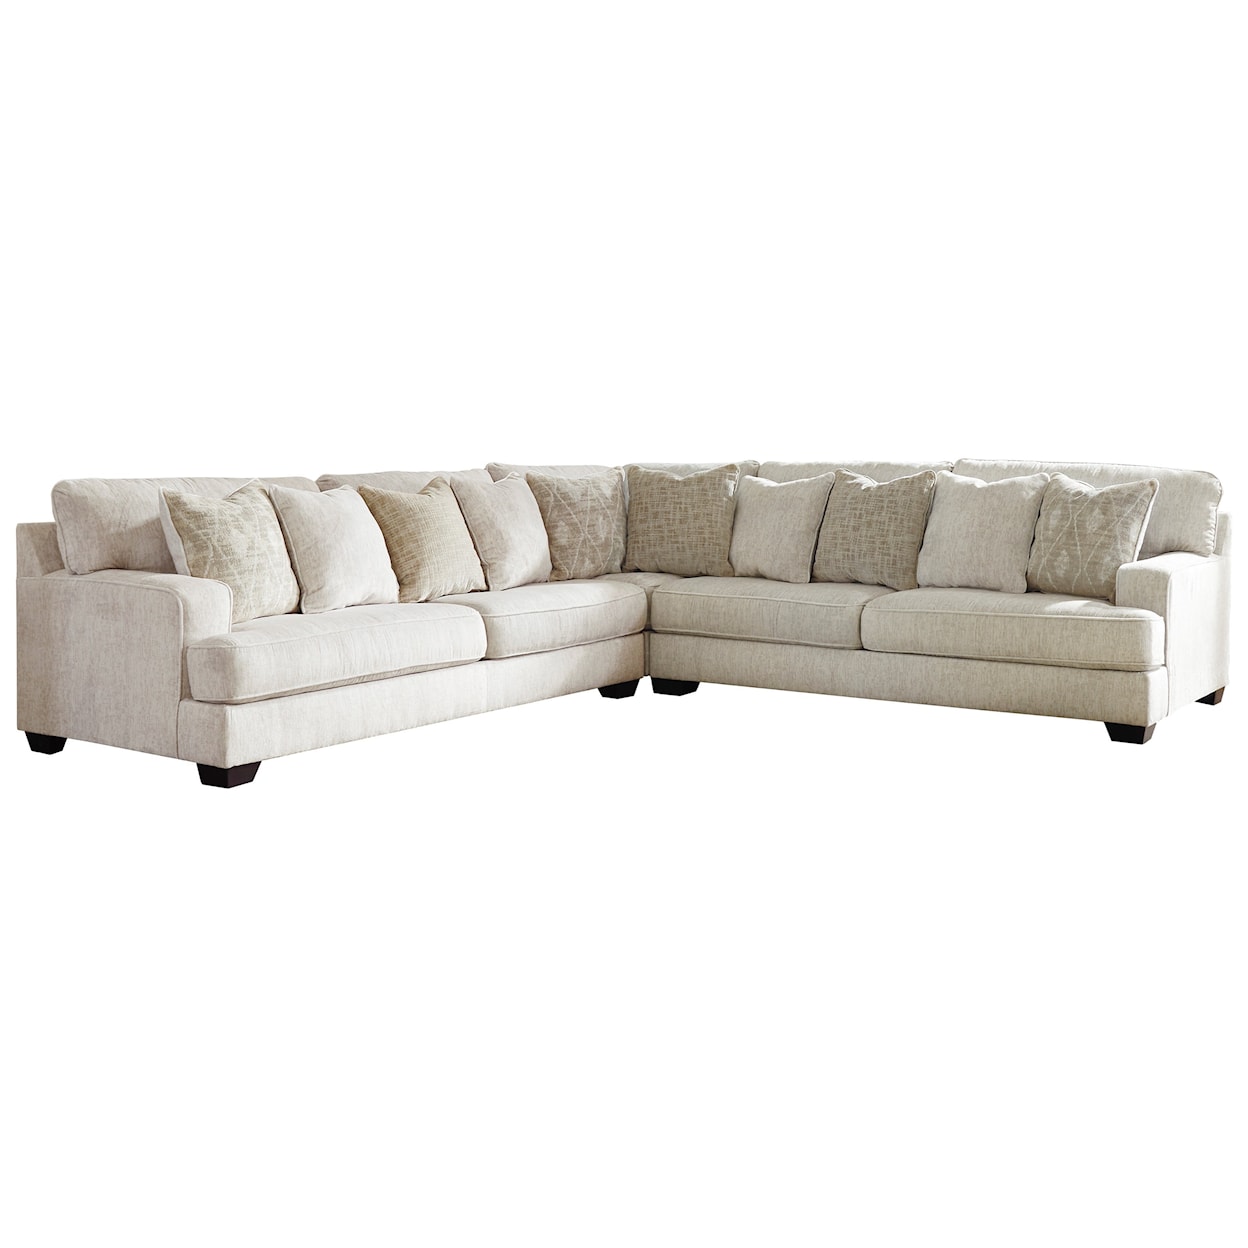 Benchcraft Rawcliffe 3-Piece Sectional